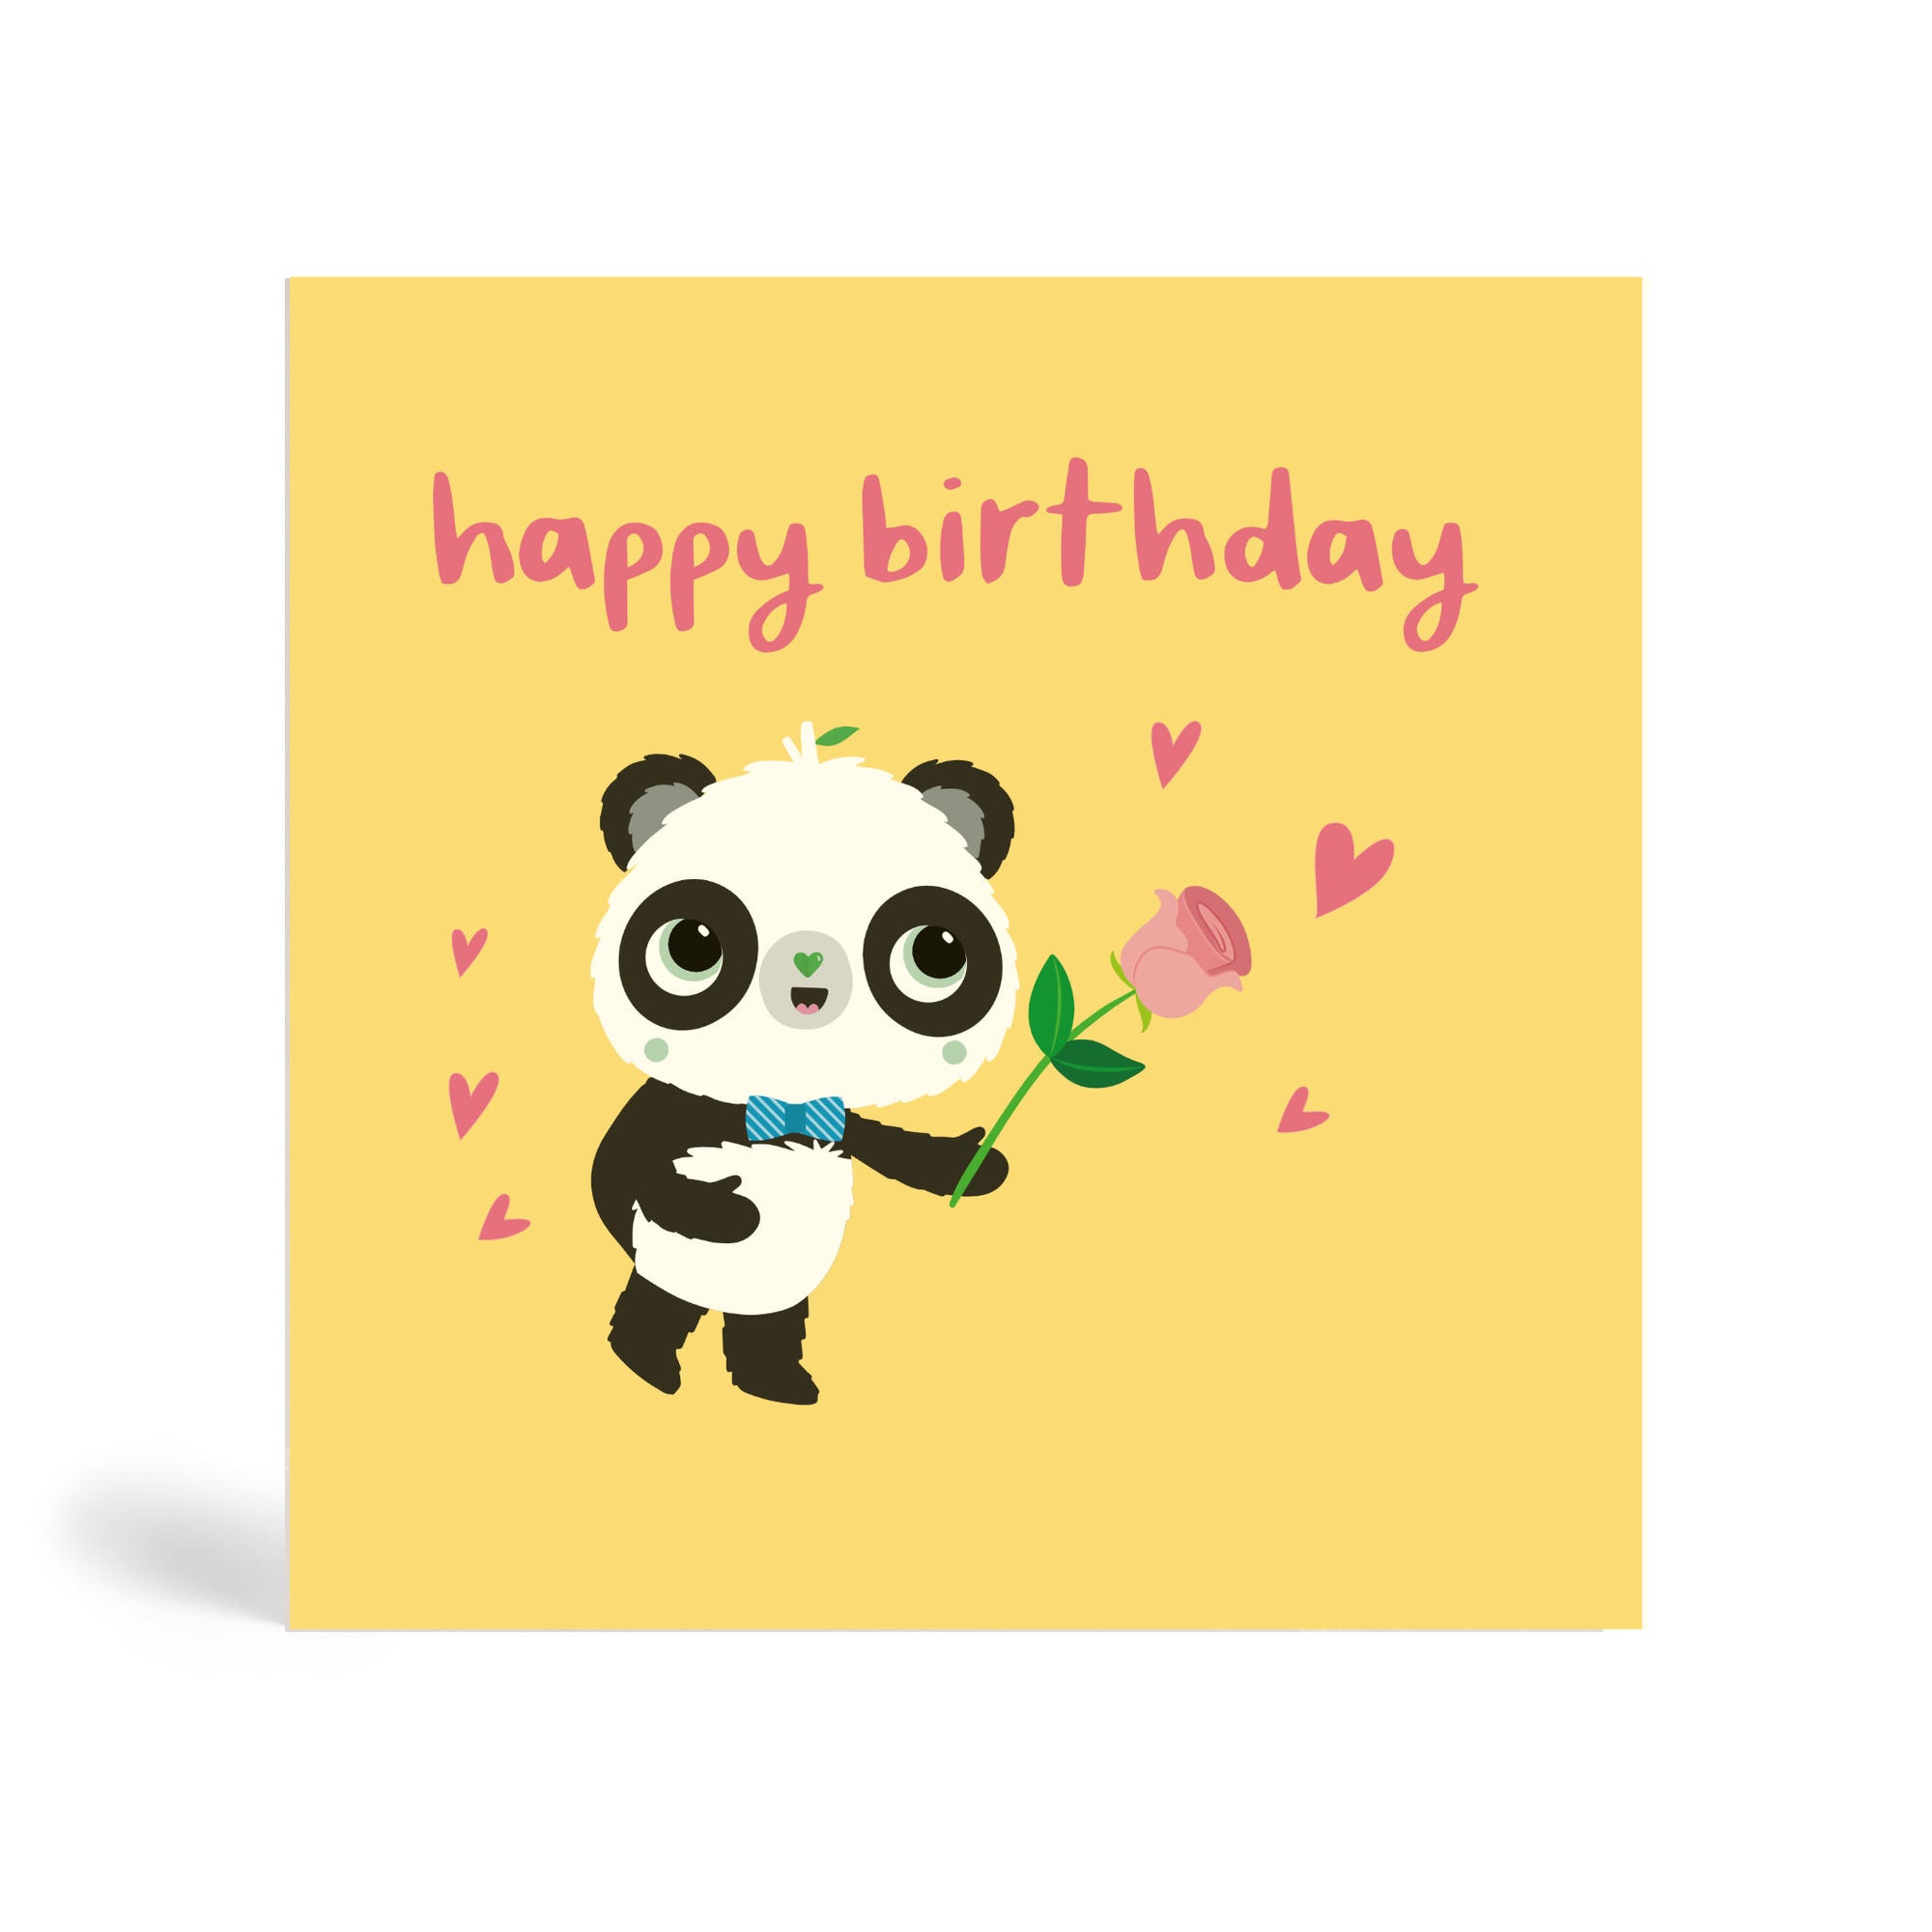 150mm square eco-friendly, tree free, Pink Happy Birthday greeting card in cream background with Panda wearing a bow tie and holding a pink rose surrounded by pink heart shapes.